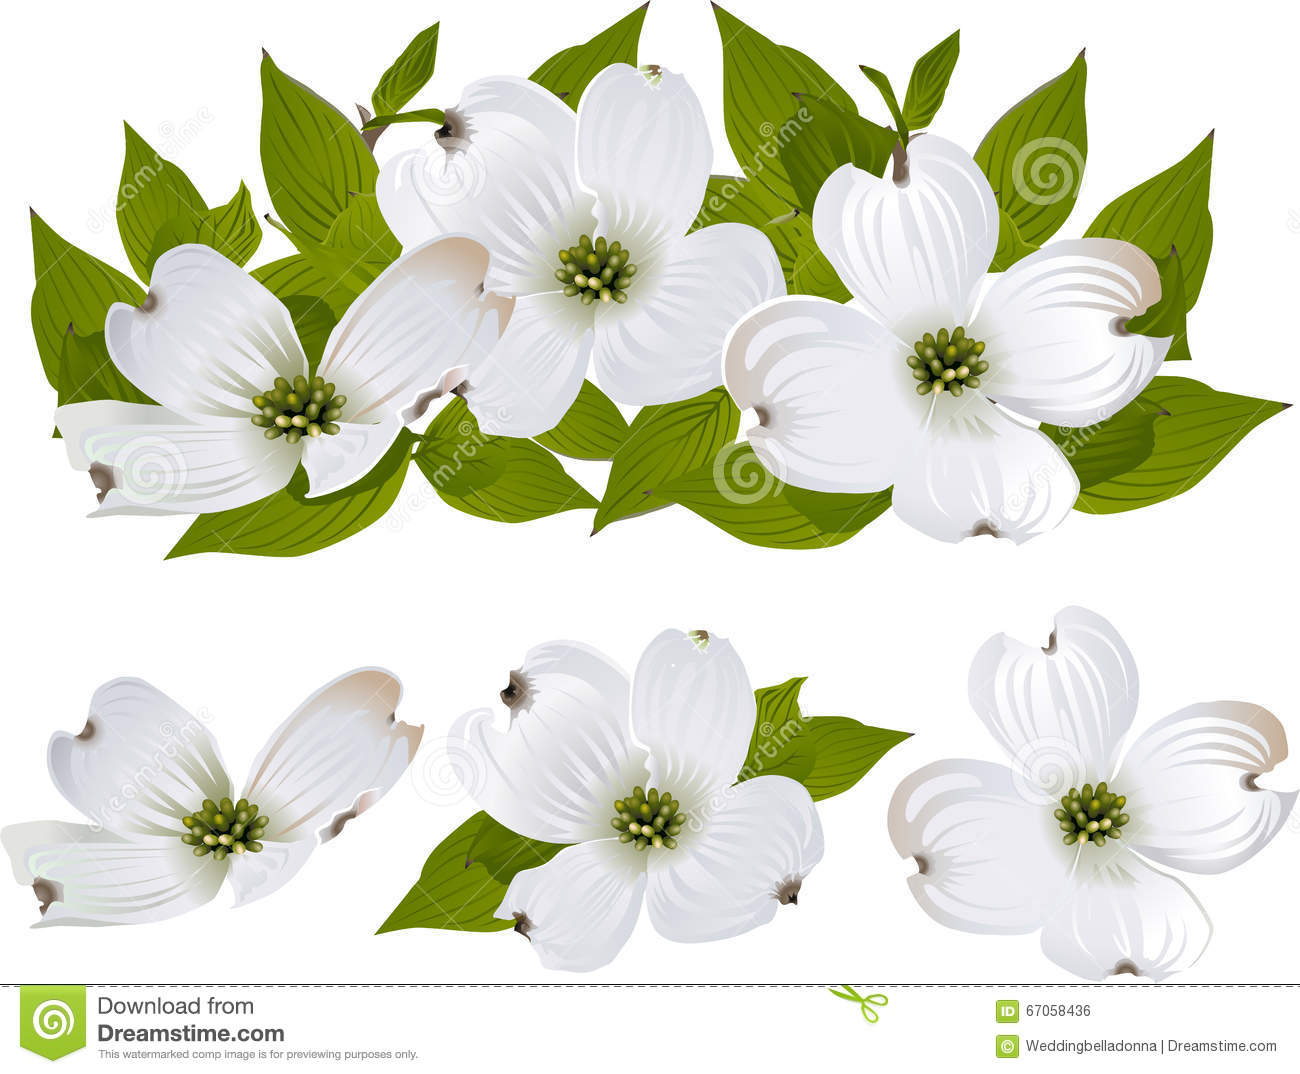 Dogwood clipart free 4 » Clipart Station.